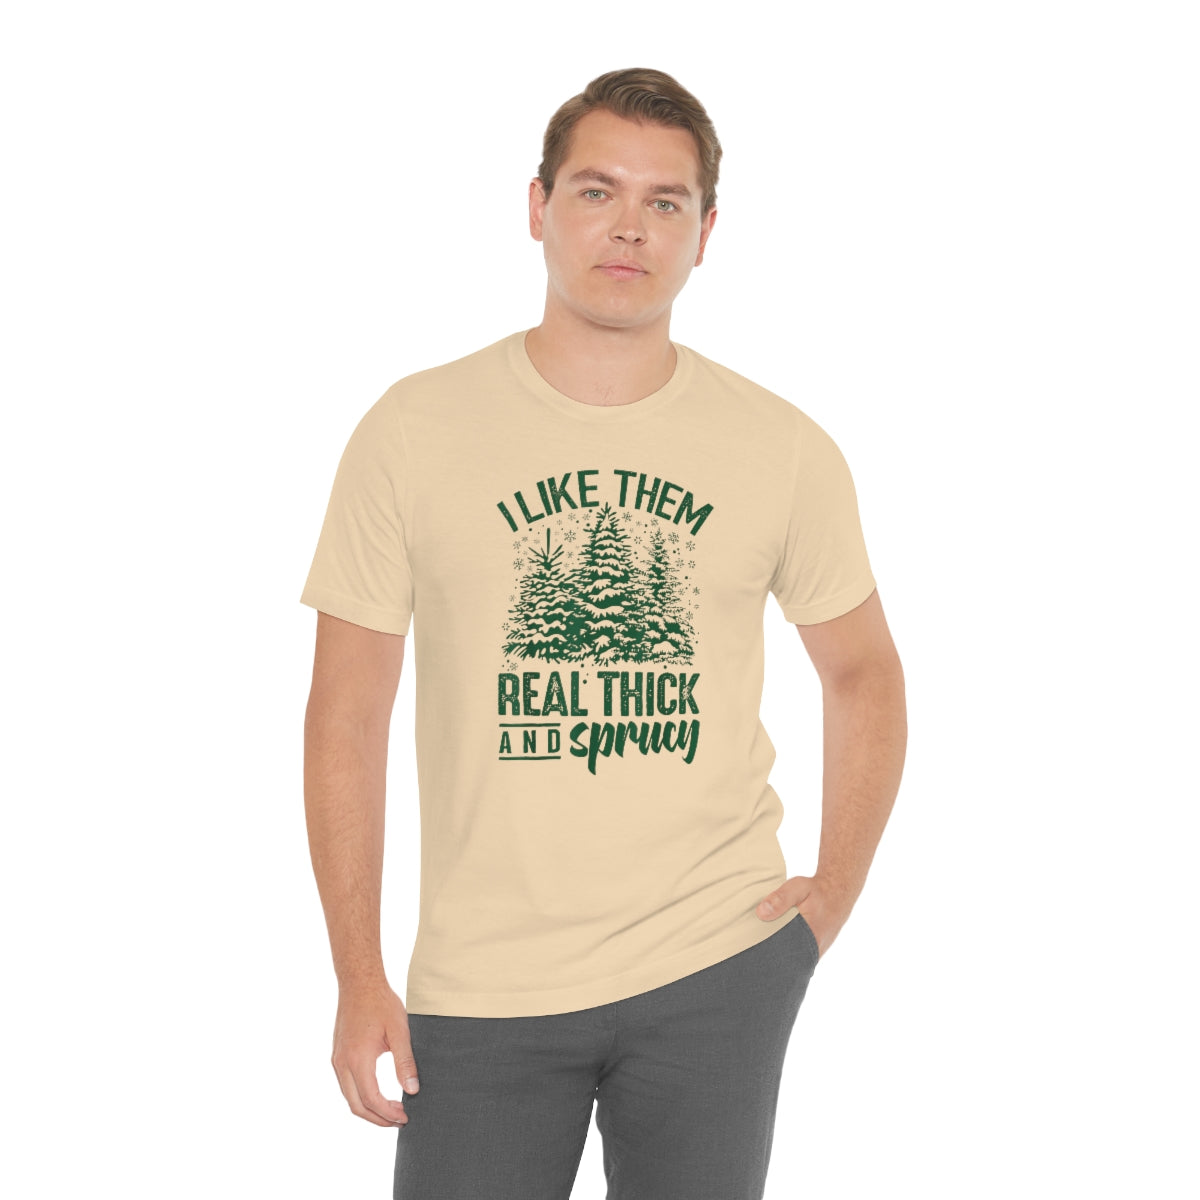 Thick & Sprucey Adult Unisex Tee